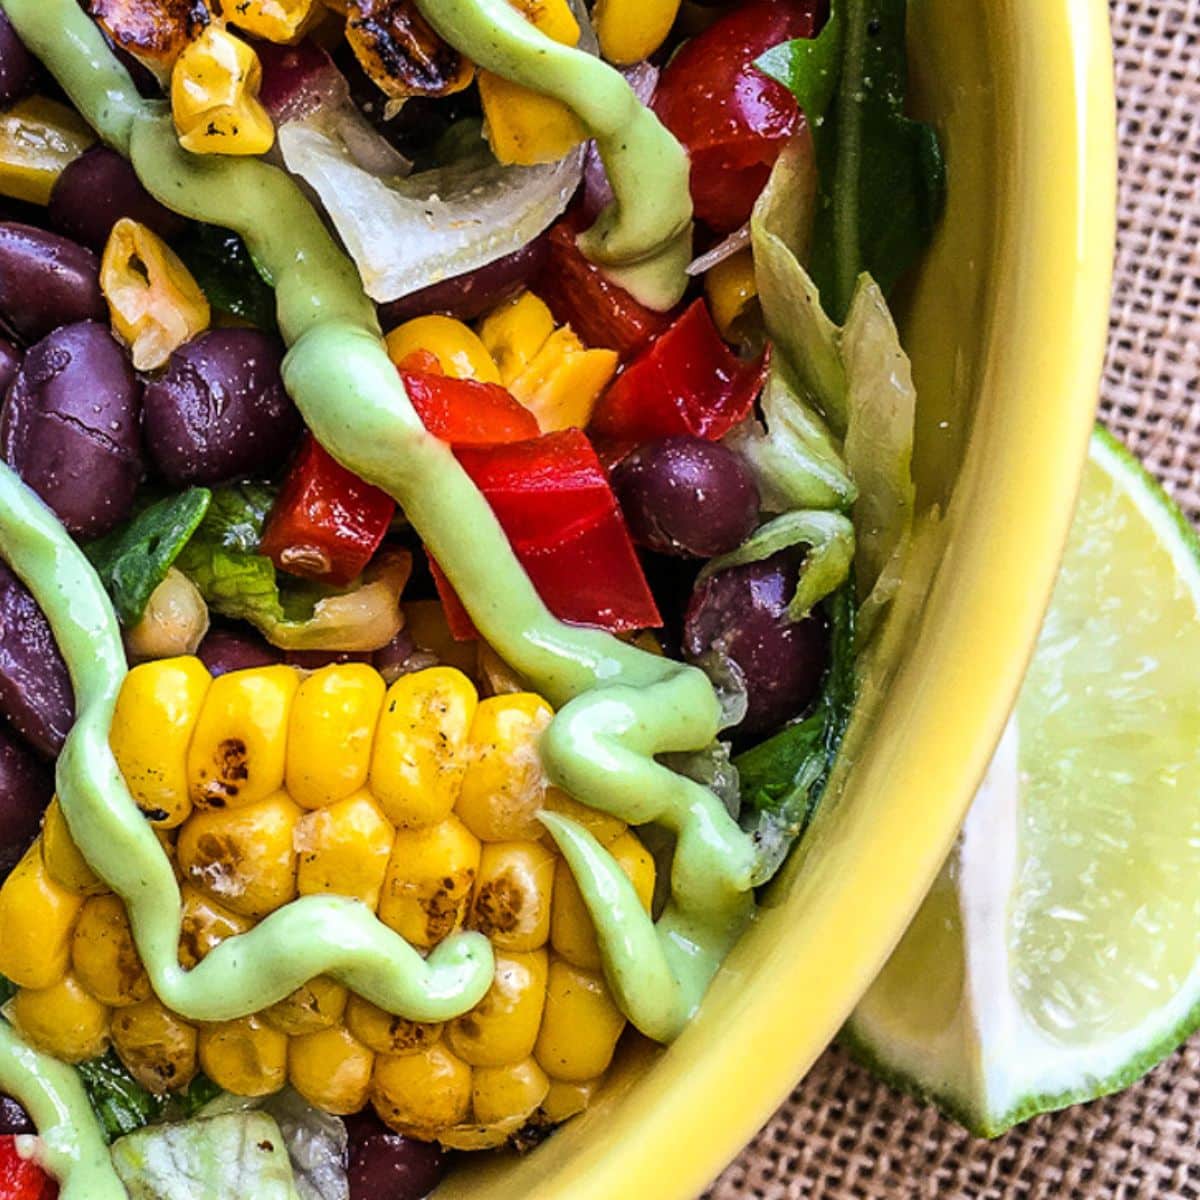 Mexican Chopped Salad with Creamy Avocado Dressing